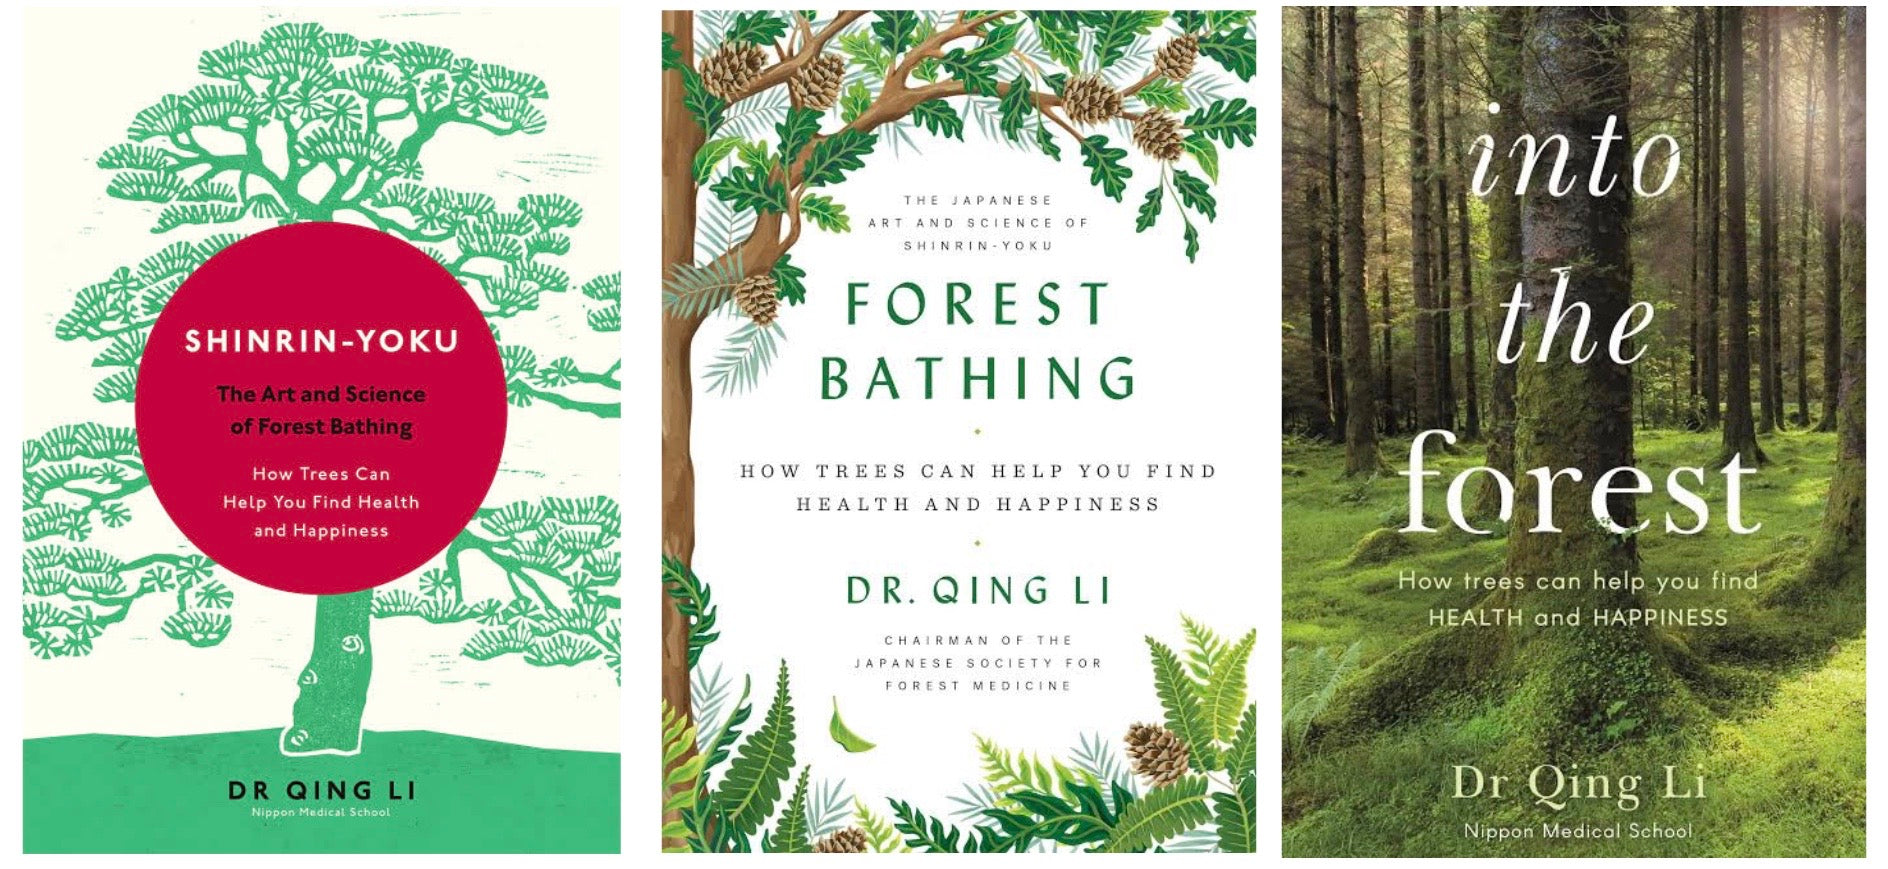 Forest Bathing book cover by Dr Quing Li 